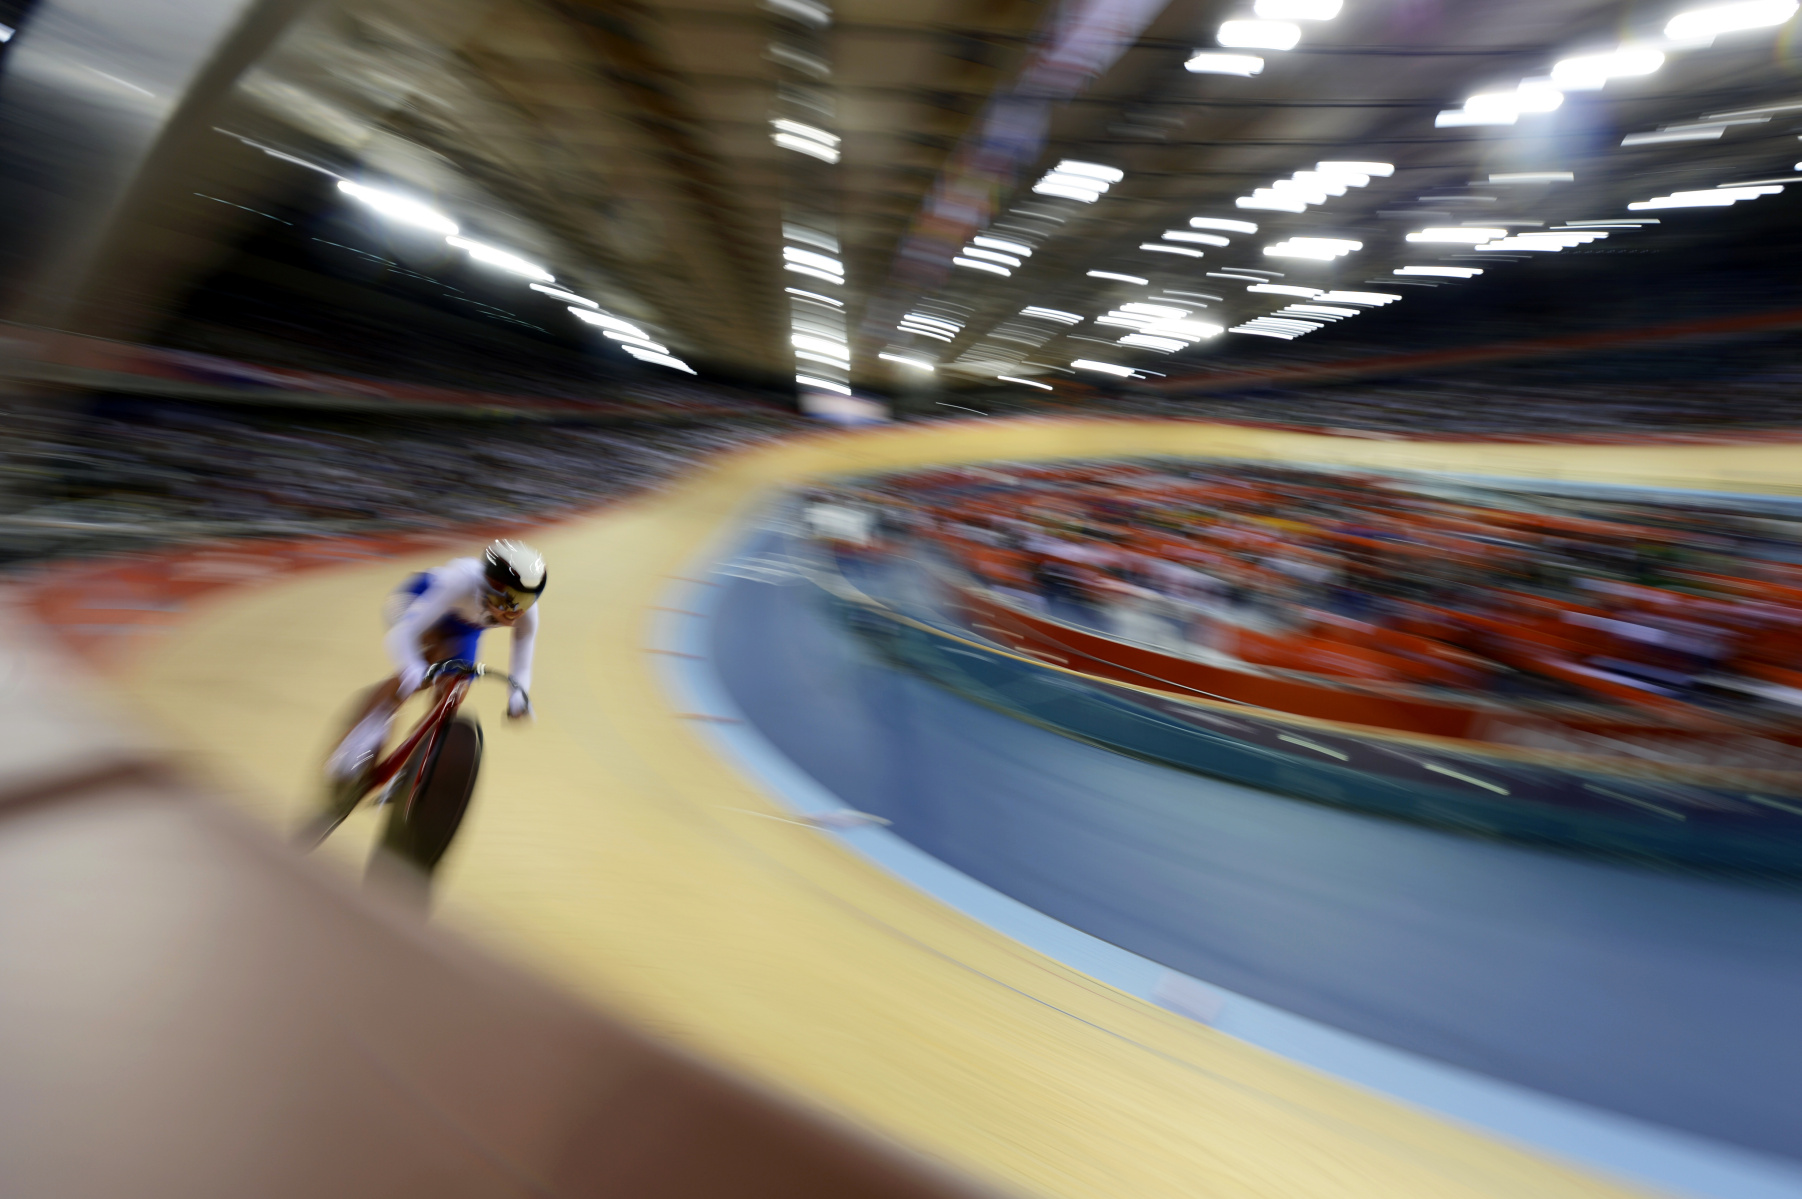 Women's Omnium at the Velodrome, London Olympics : Olympics : Photography by Adam Stoltman: Sports Photography, The Arts, Portraiture, Travel, Photojournalism and Fine Art in New York